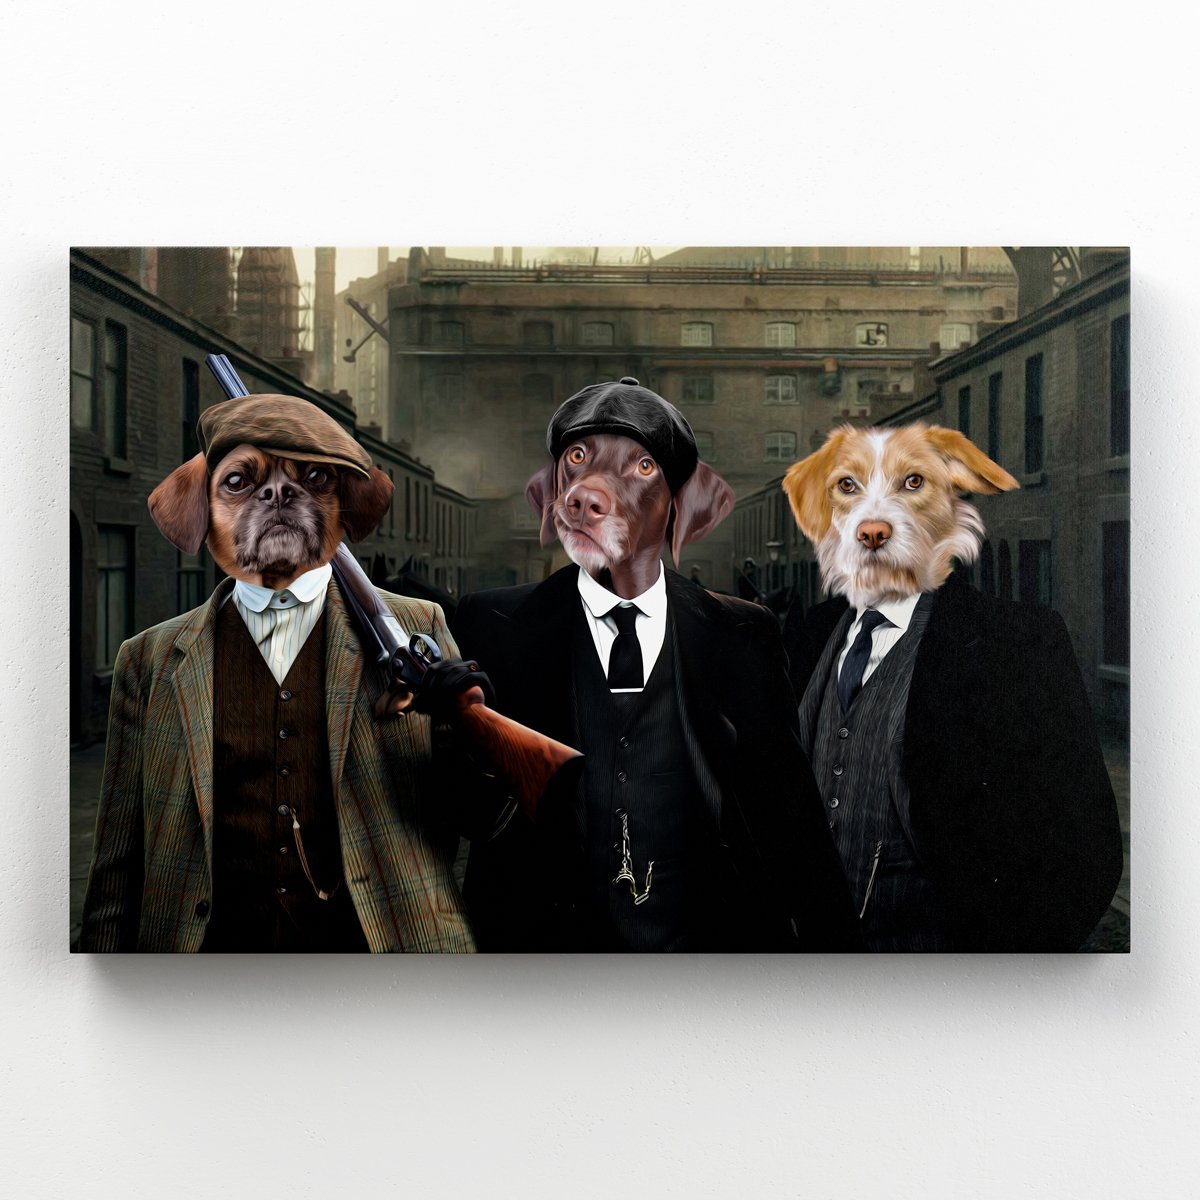 The 3 Brothers (Peaky Blinders Inspired): Custom Pet Canvas - Paw & Glory - #pet portraits# - #dog portraits# - #pet portraits uk#paw and glory, pet portraits canvas,the pet canvas, canvas of your pet, custom pet canvas, dog art canvas, pet canvas portrait